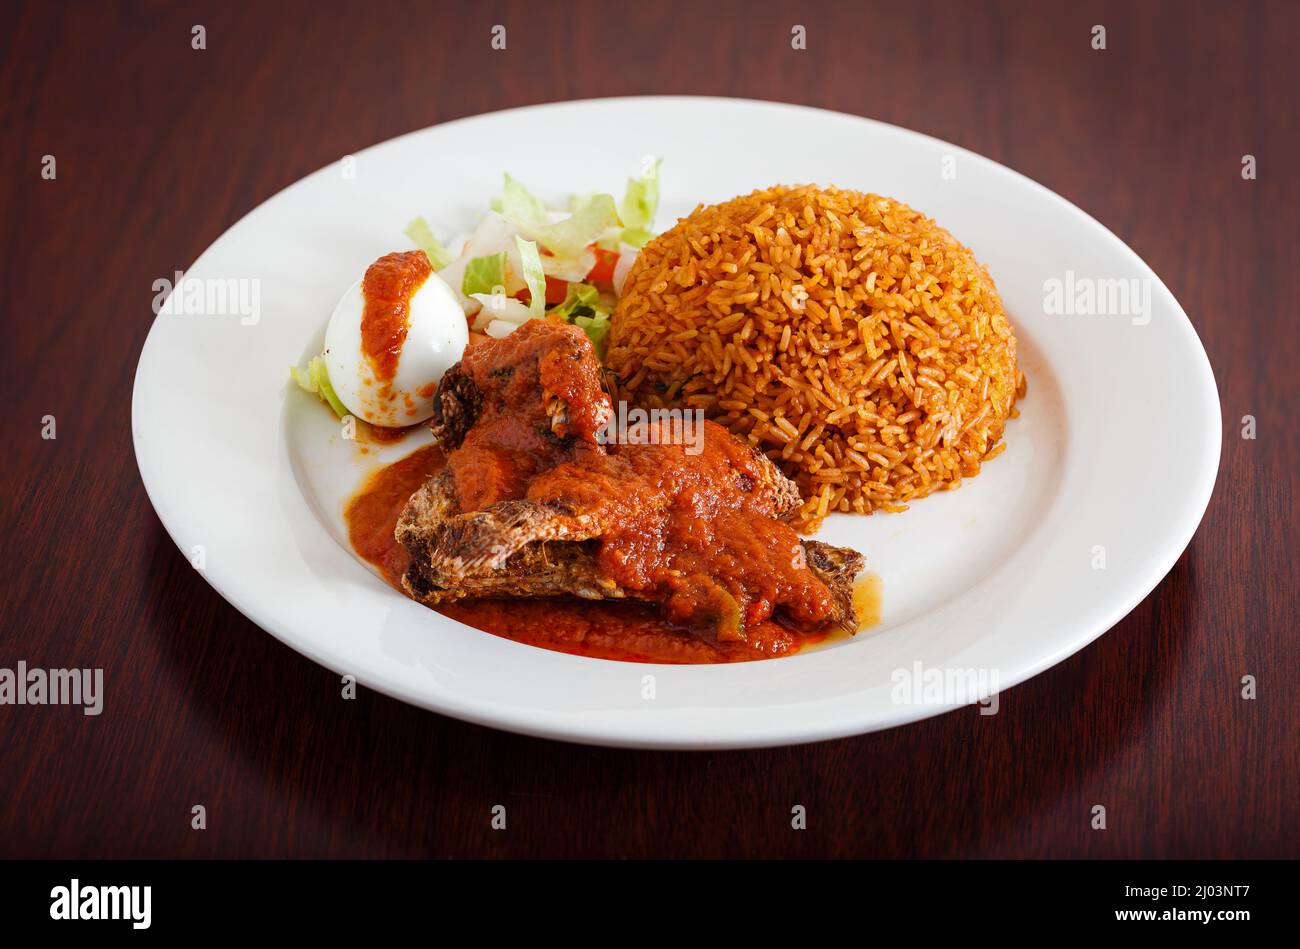 Classic Ghanaian meal of jollof rice, fish covered in red sauce, and boiled egg Stock Photo